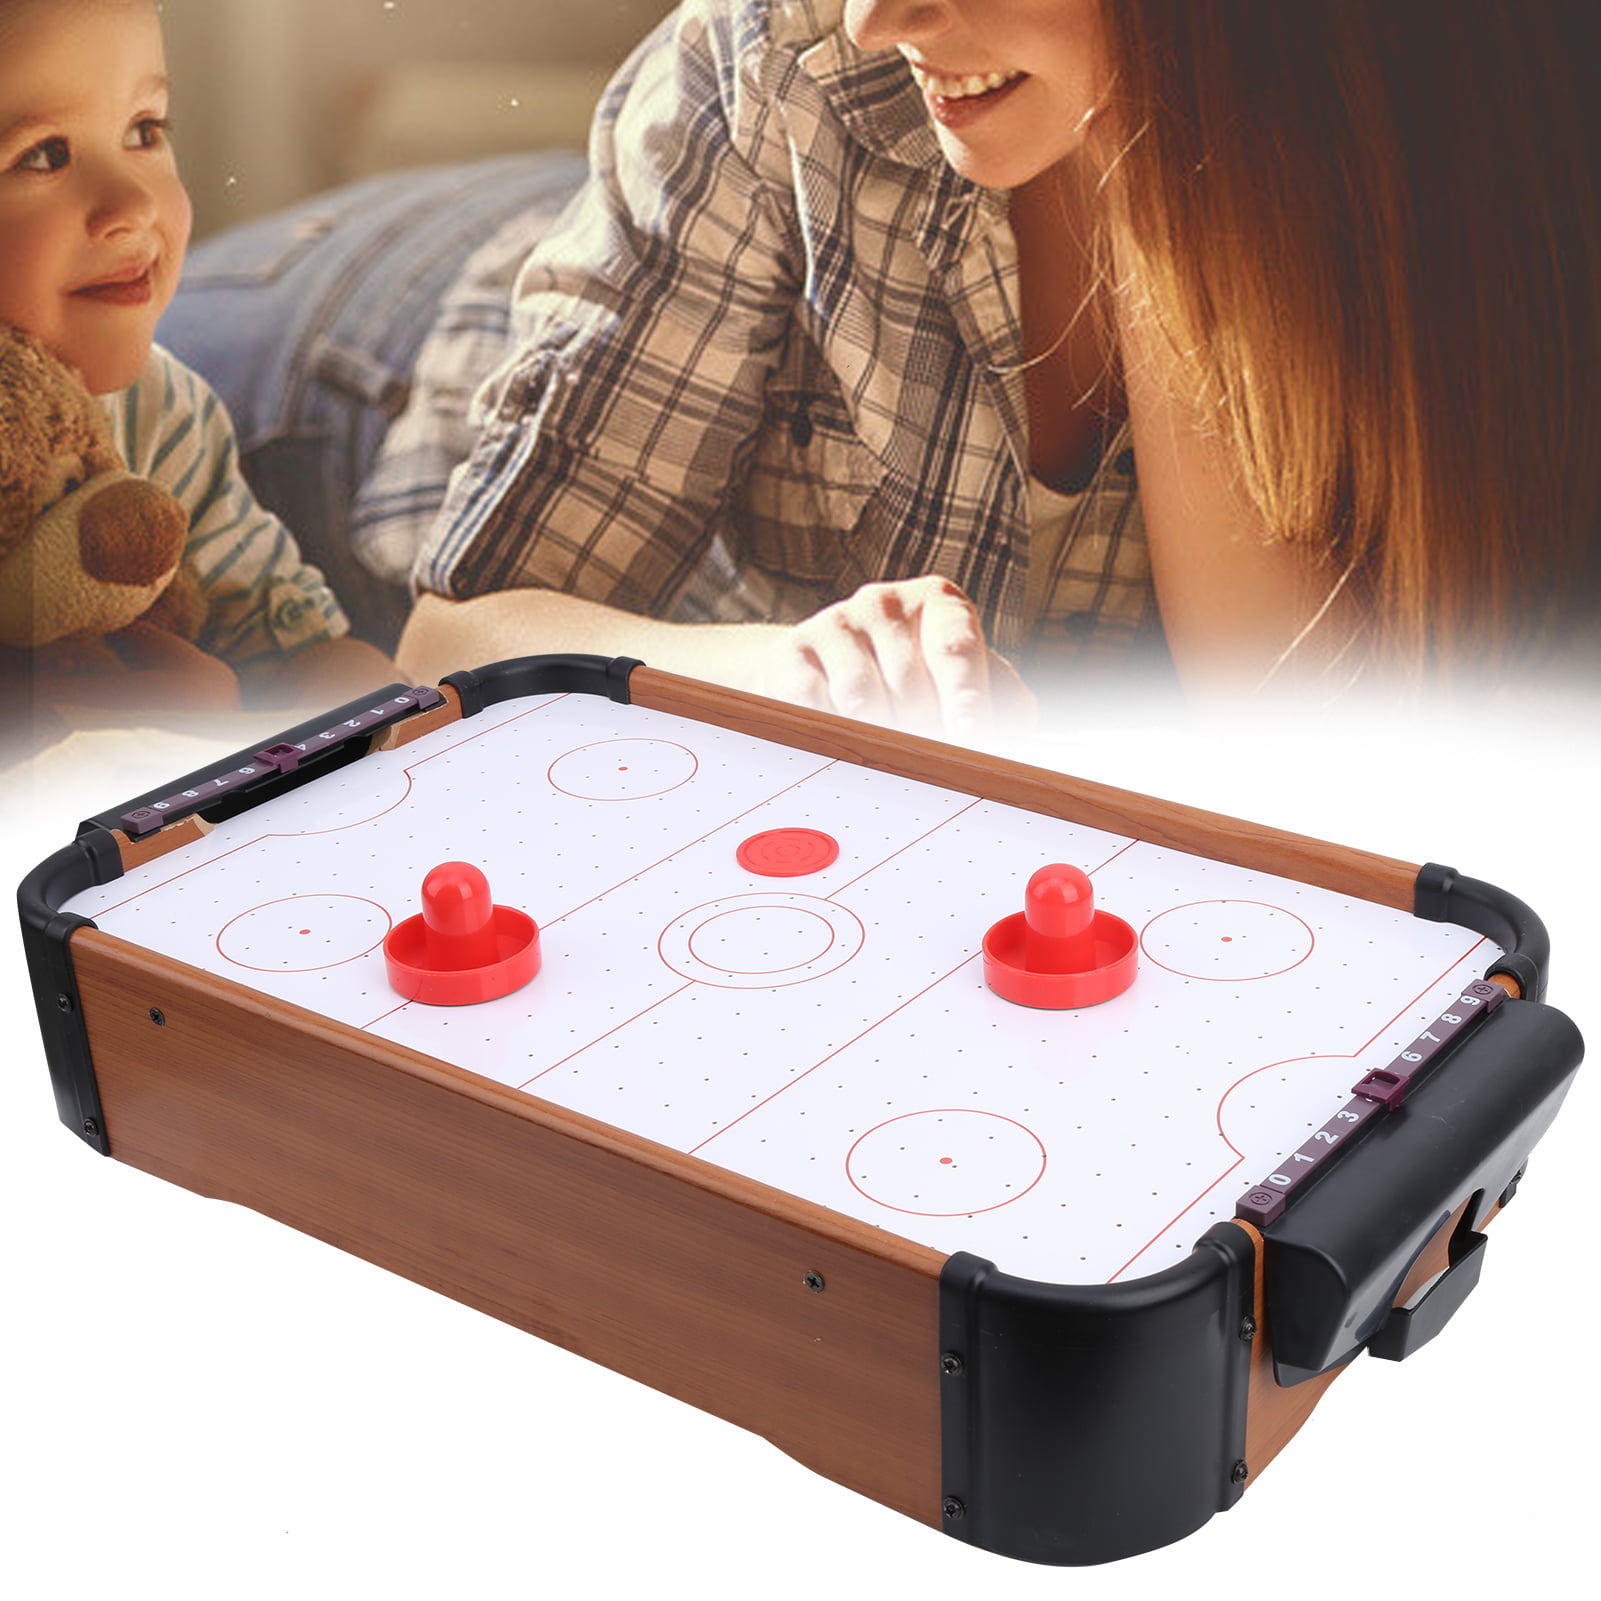 Henmomu Table Air Hockey Game Desktop Parent‑Child Interactive Portable Board Game Toys Gift,Air Hockey Game,Children Air Hockey Game